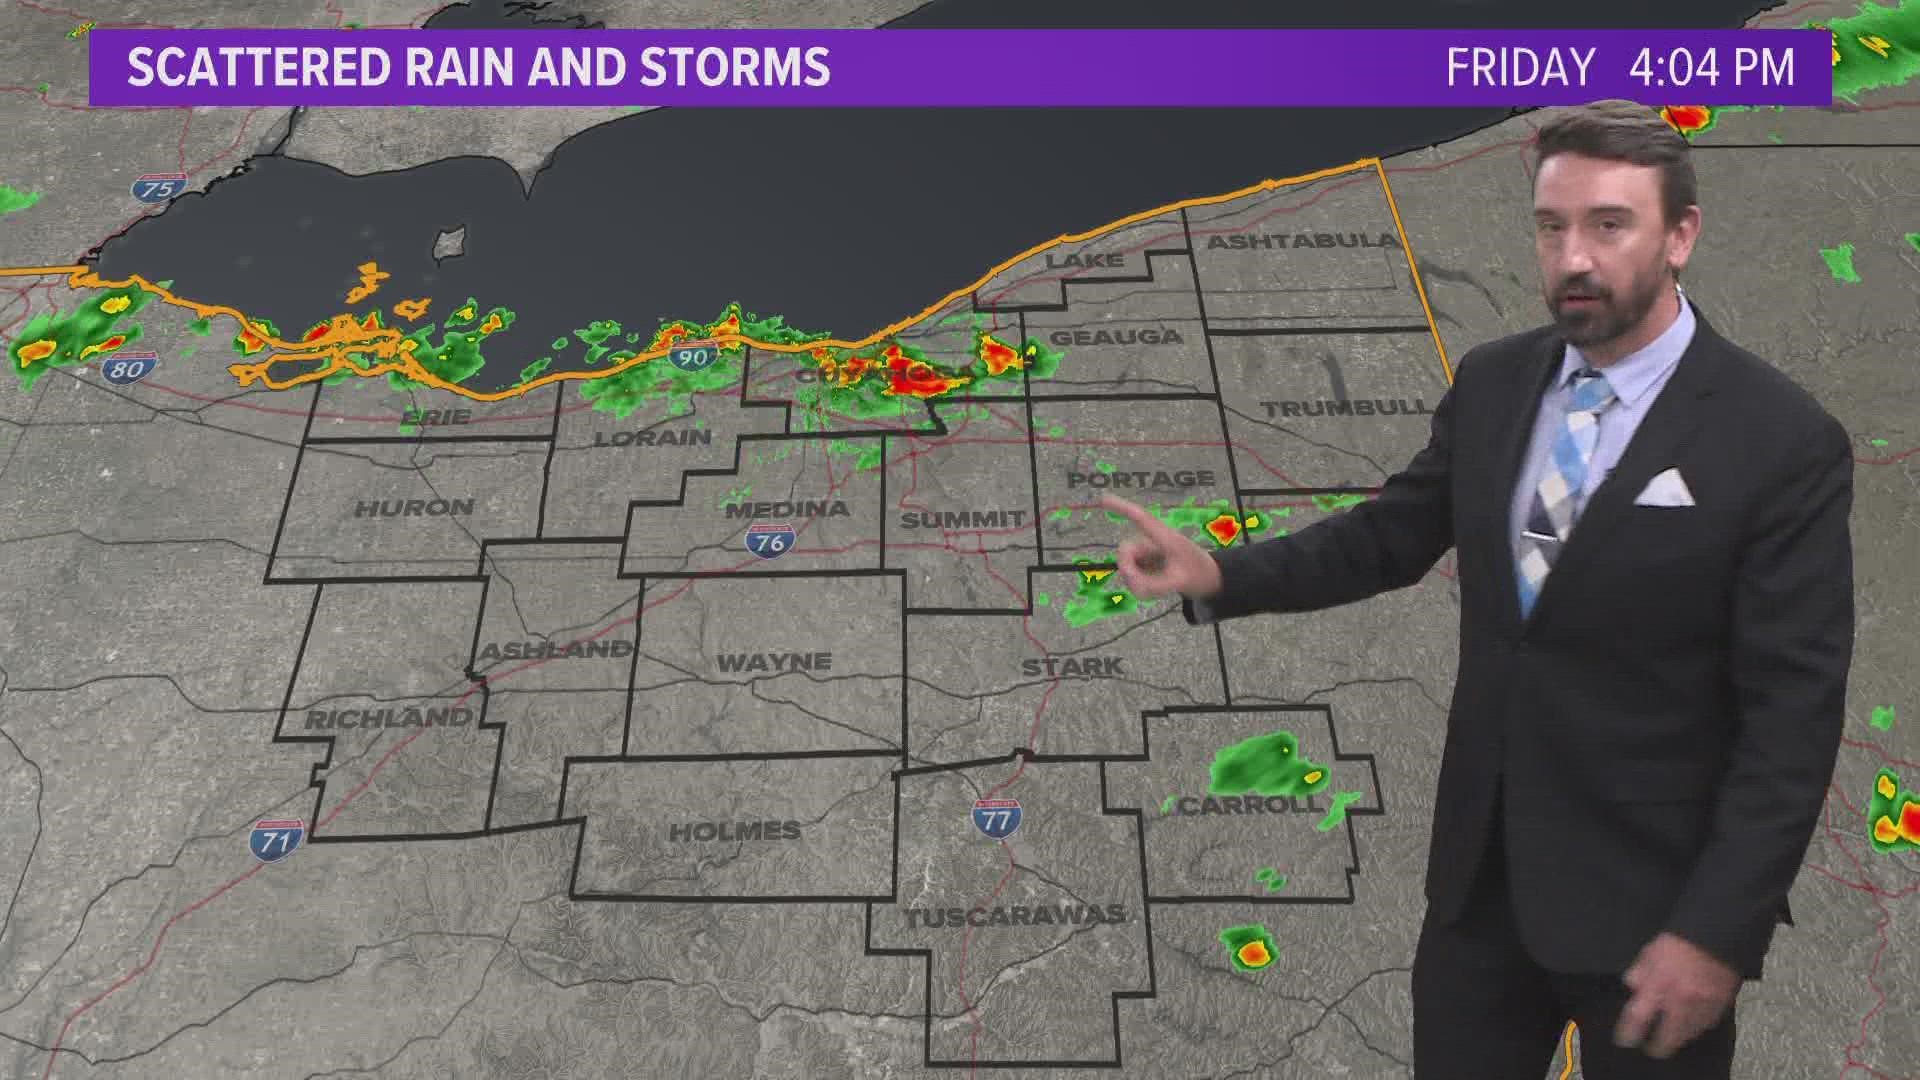 While the rain has subsided, many communities should prepare for storms to resume tonight. 3News Meteorologist Matt Wintz has the forecast for August 5, 2022.